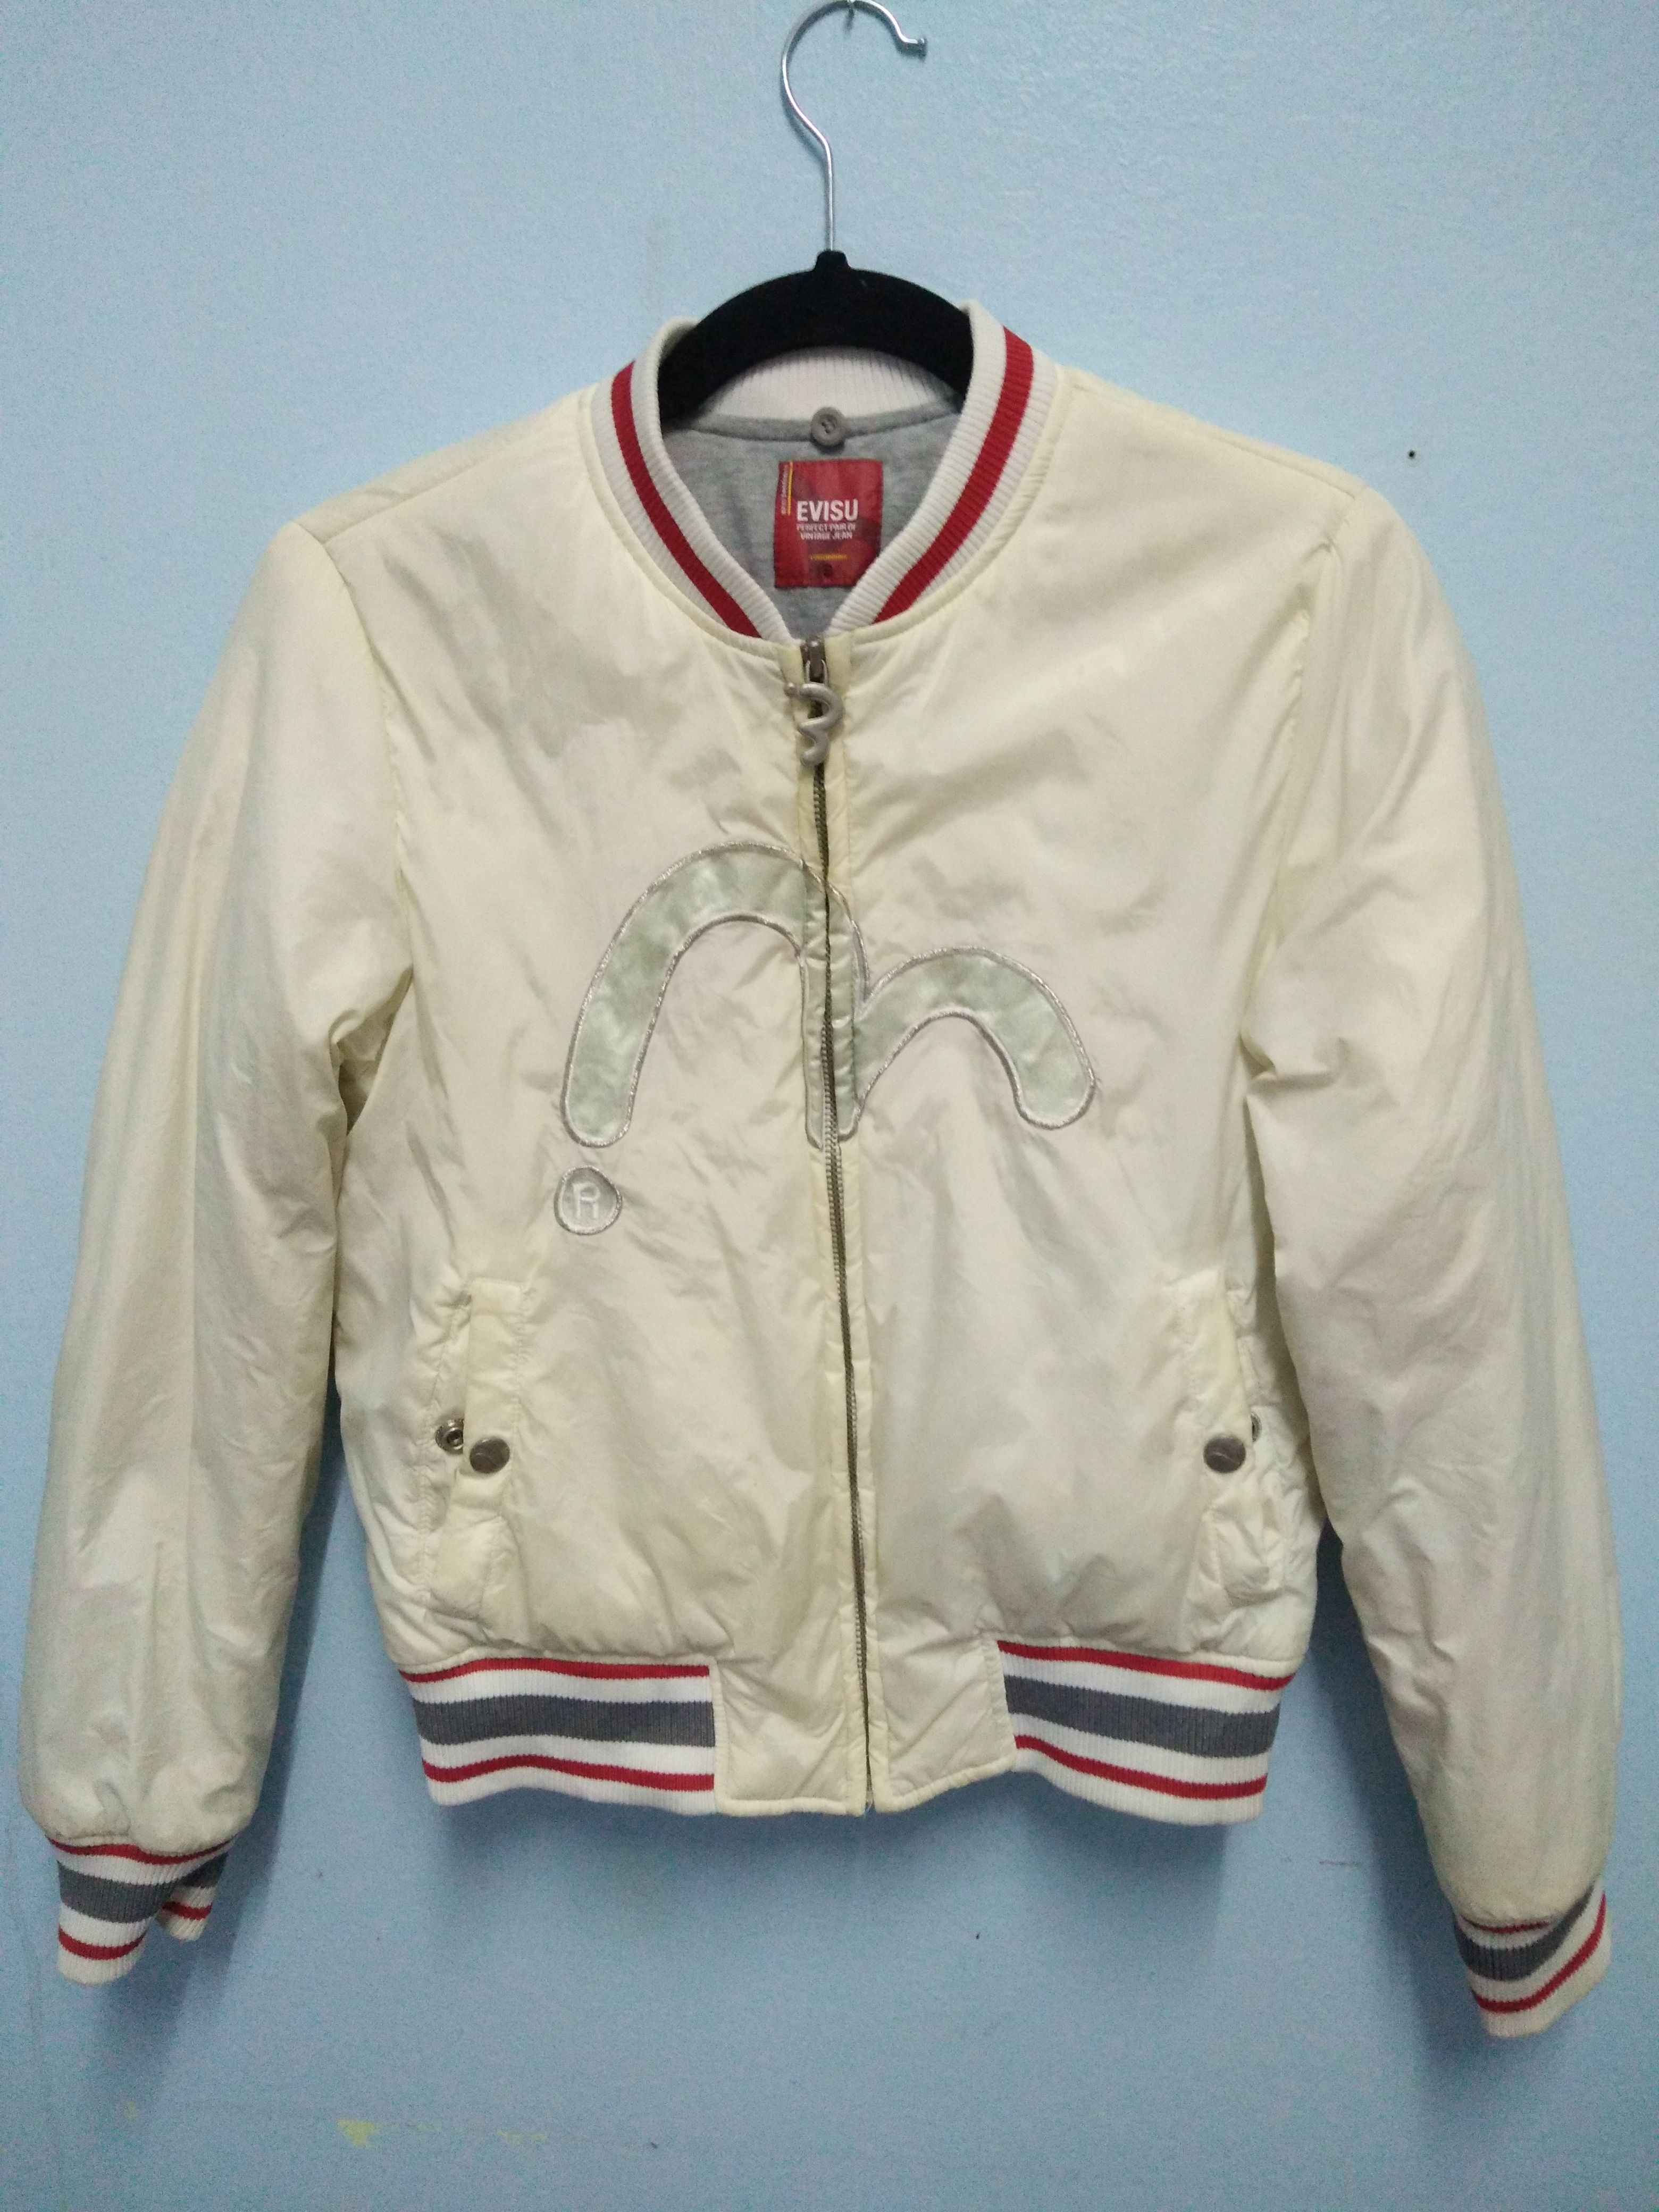 Evisu !!NEED GONE TODAY BEFORE DELETE!! Evisu Bomber Jacket Small Size Size US S / EU 44-46 / 1 - 1 Preview